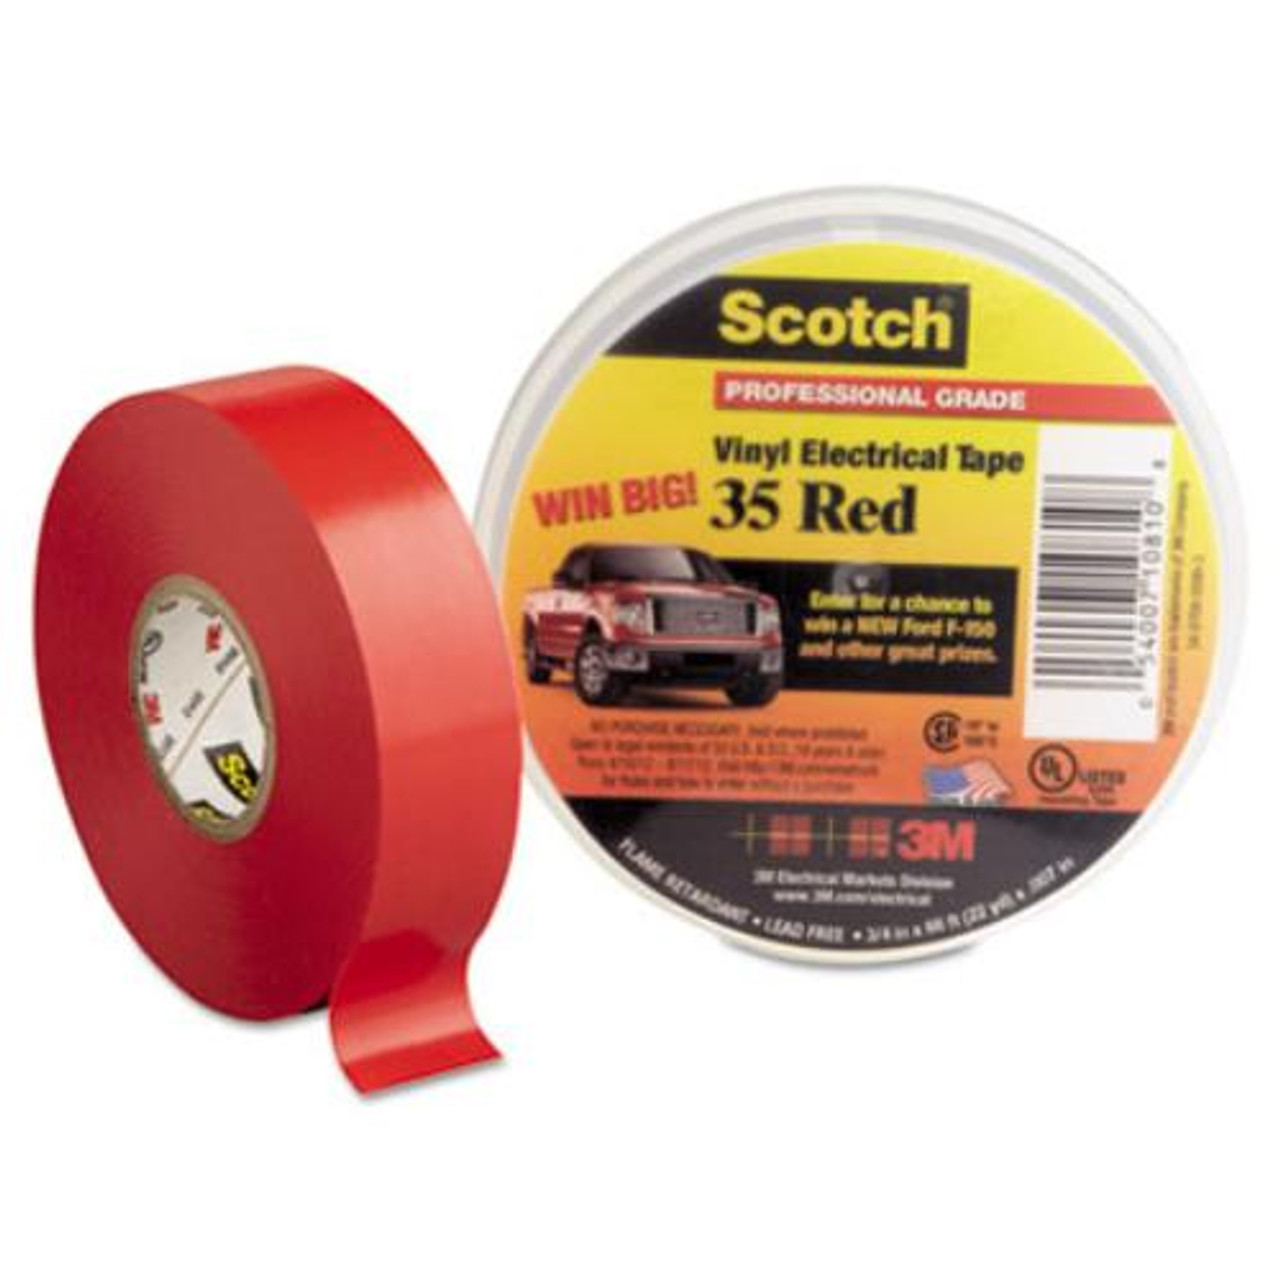 Vinyl Electrical Tapes - Our products